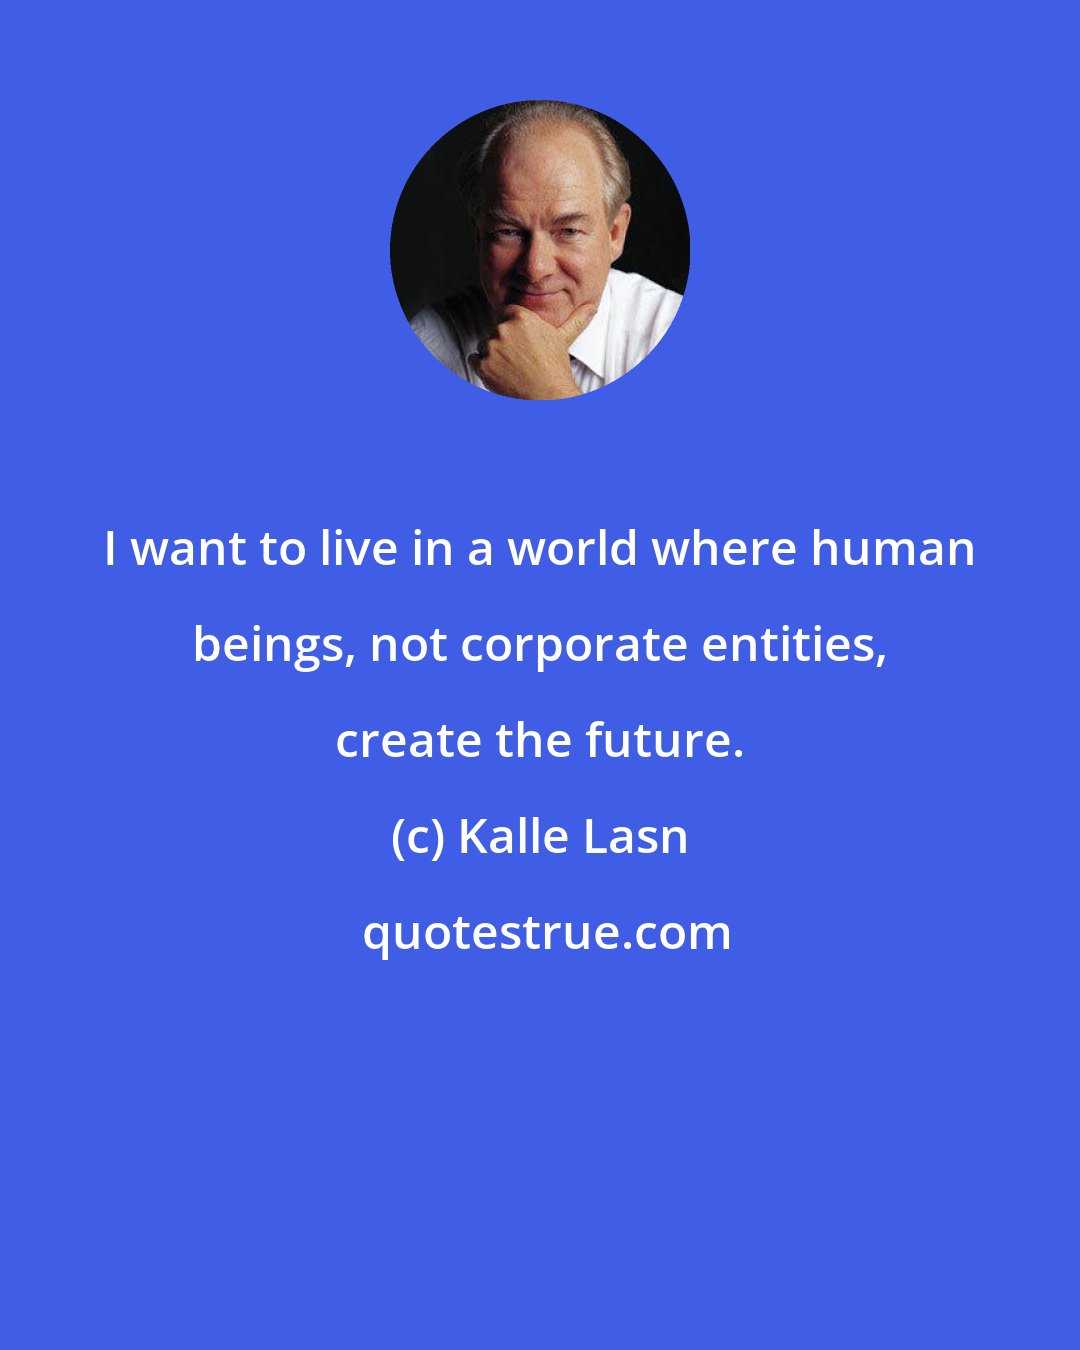 Kalle Lasn: I want to live in a world where human beings, not corporate entities, create the future.